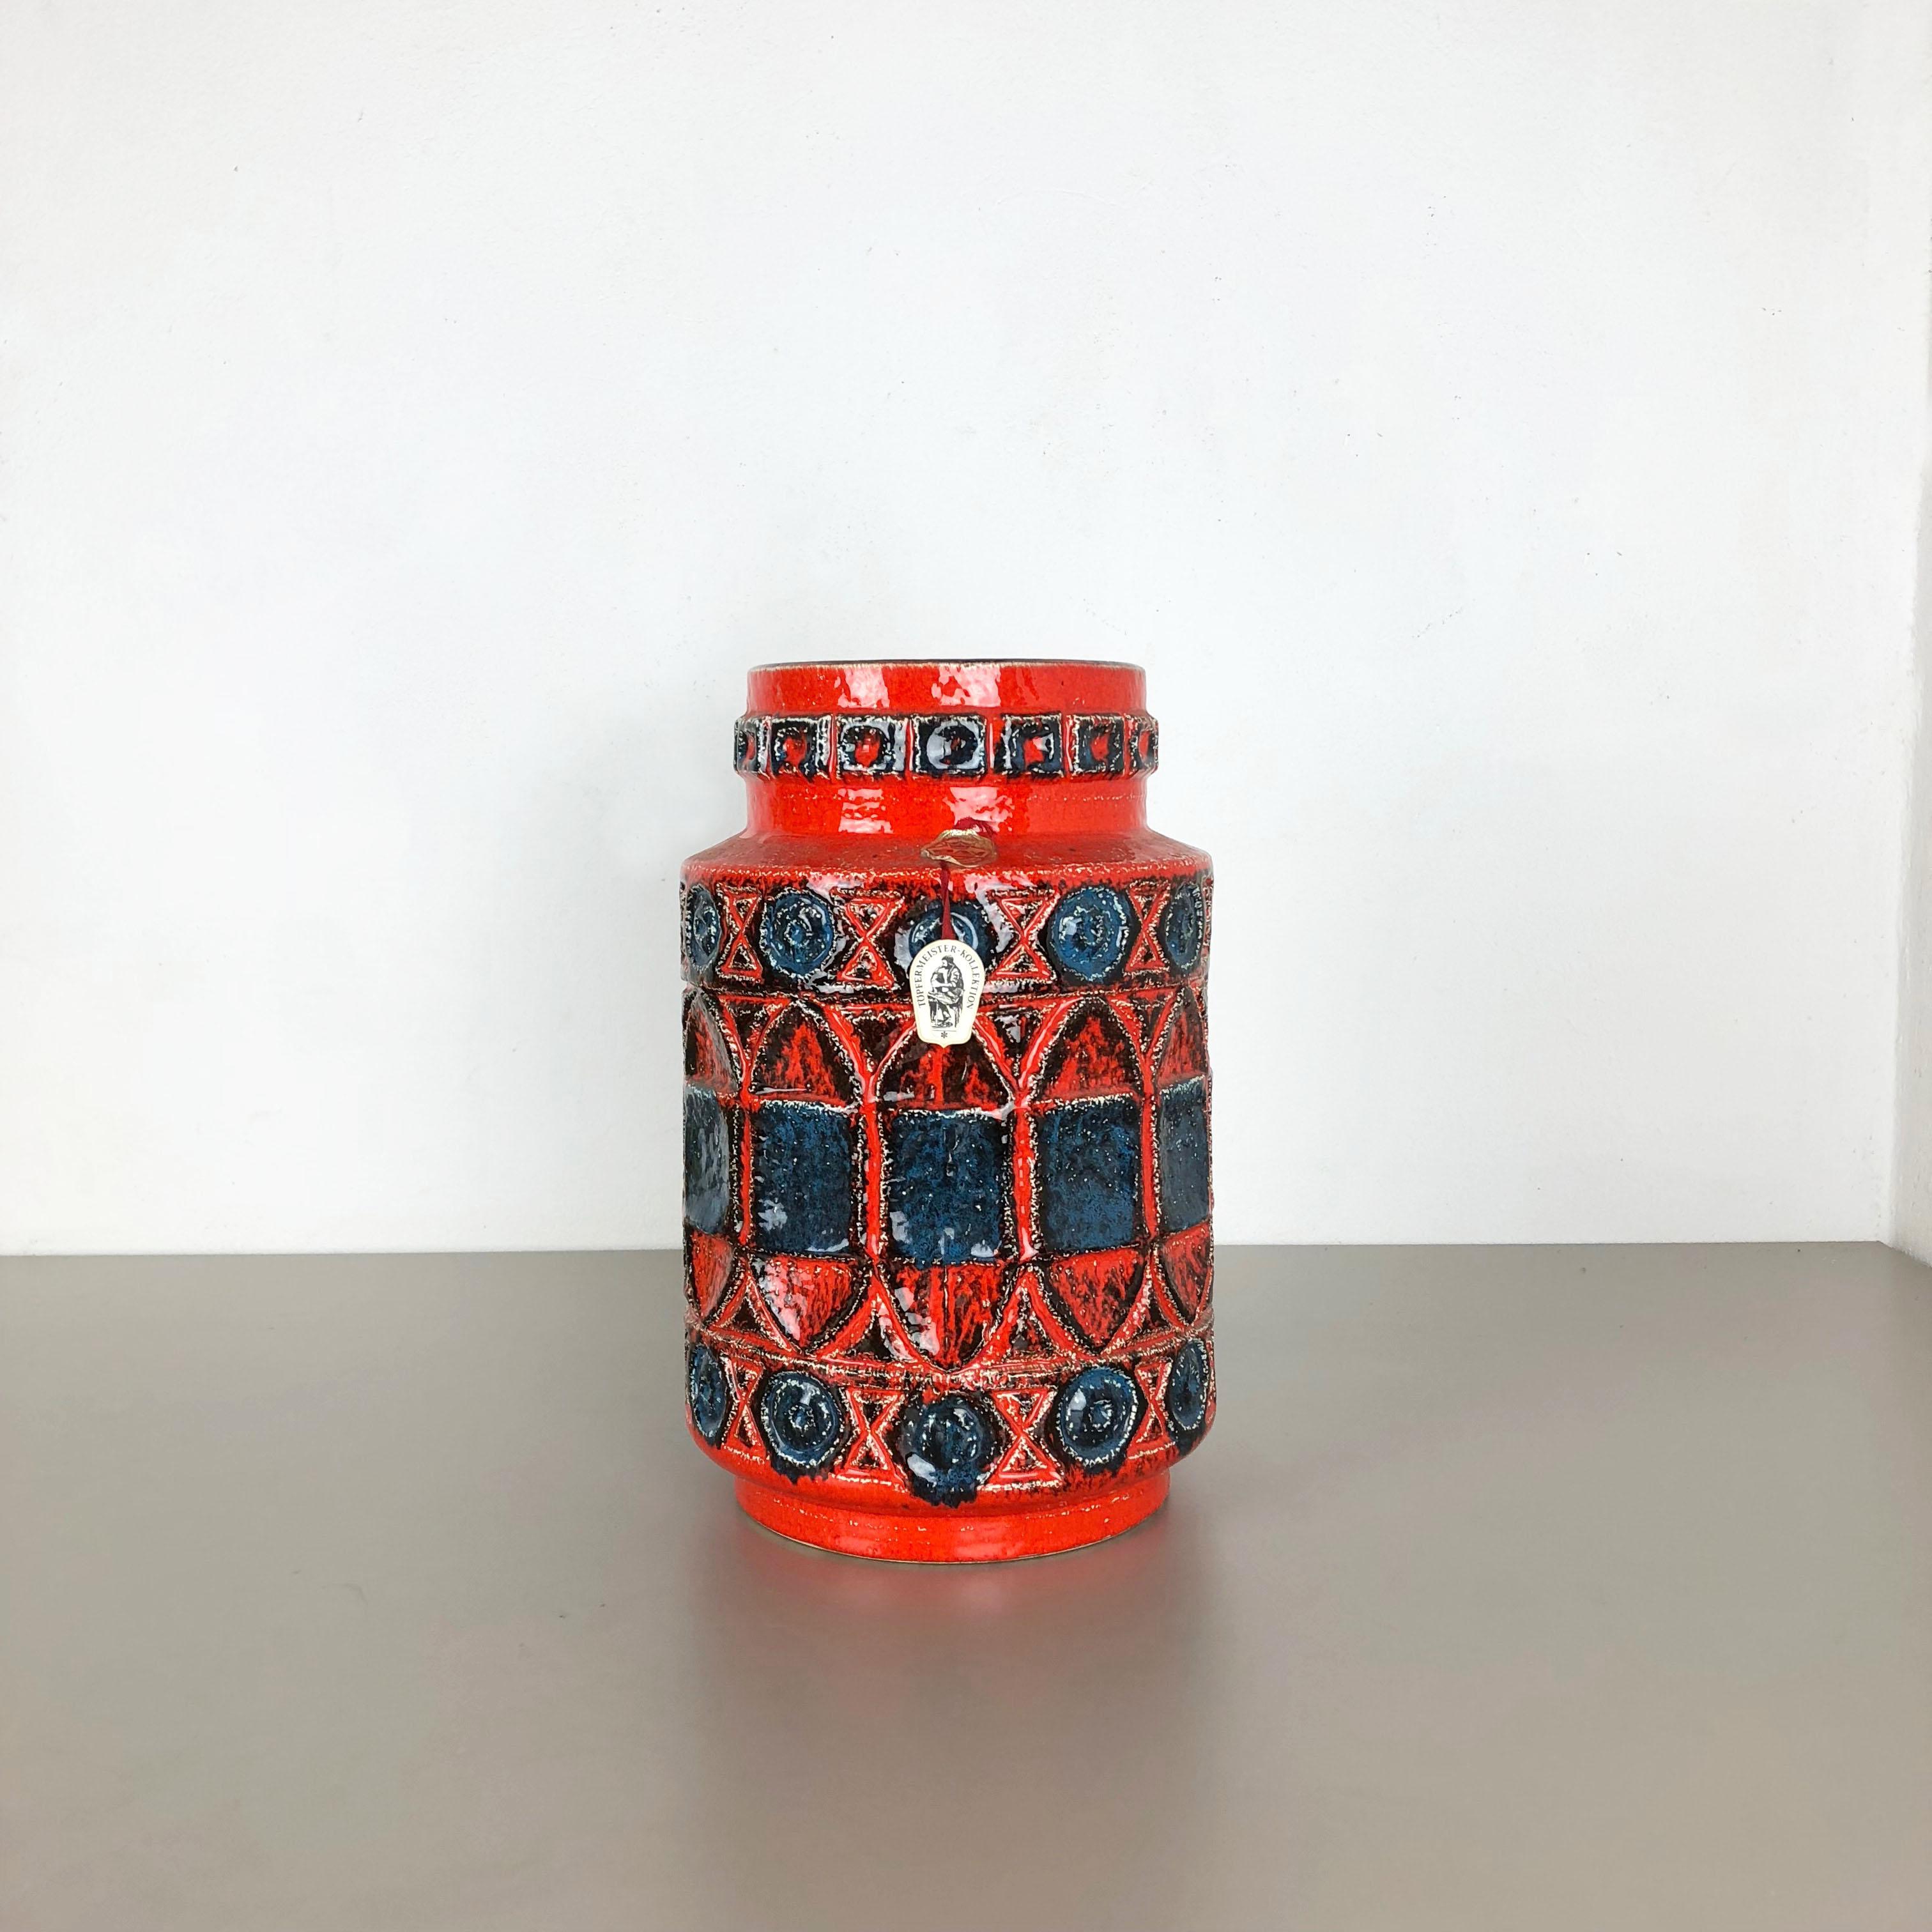 Article:

Pottery ceramic vase


Producer:

BAY ceramic, Germany



Decade:

1960s




Original vintage 1960s pottery ceramic vase made in Germany. High quality German production with a nice abstract painting and super colorful